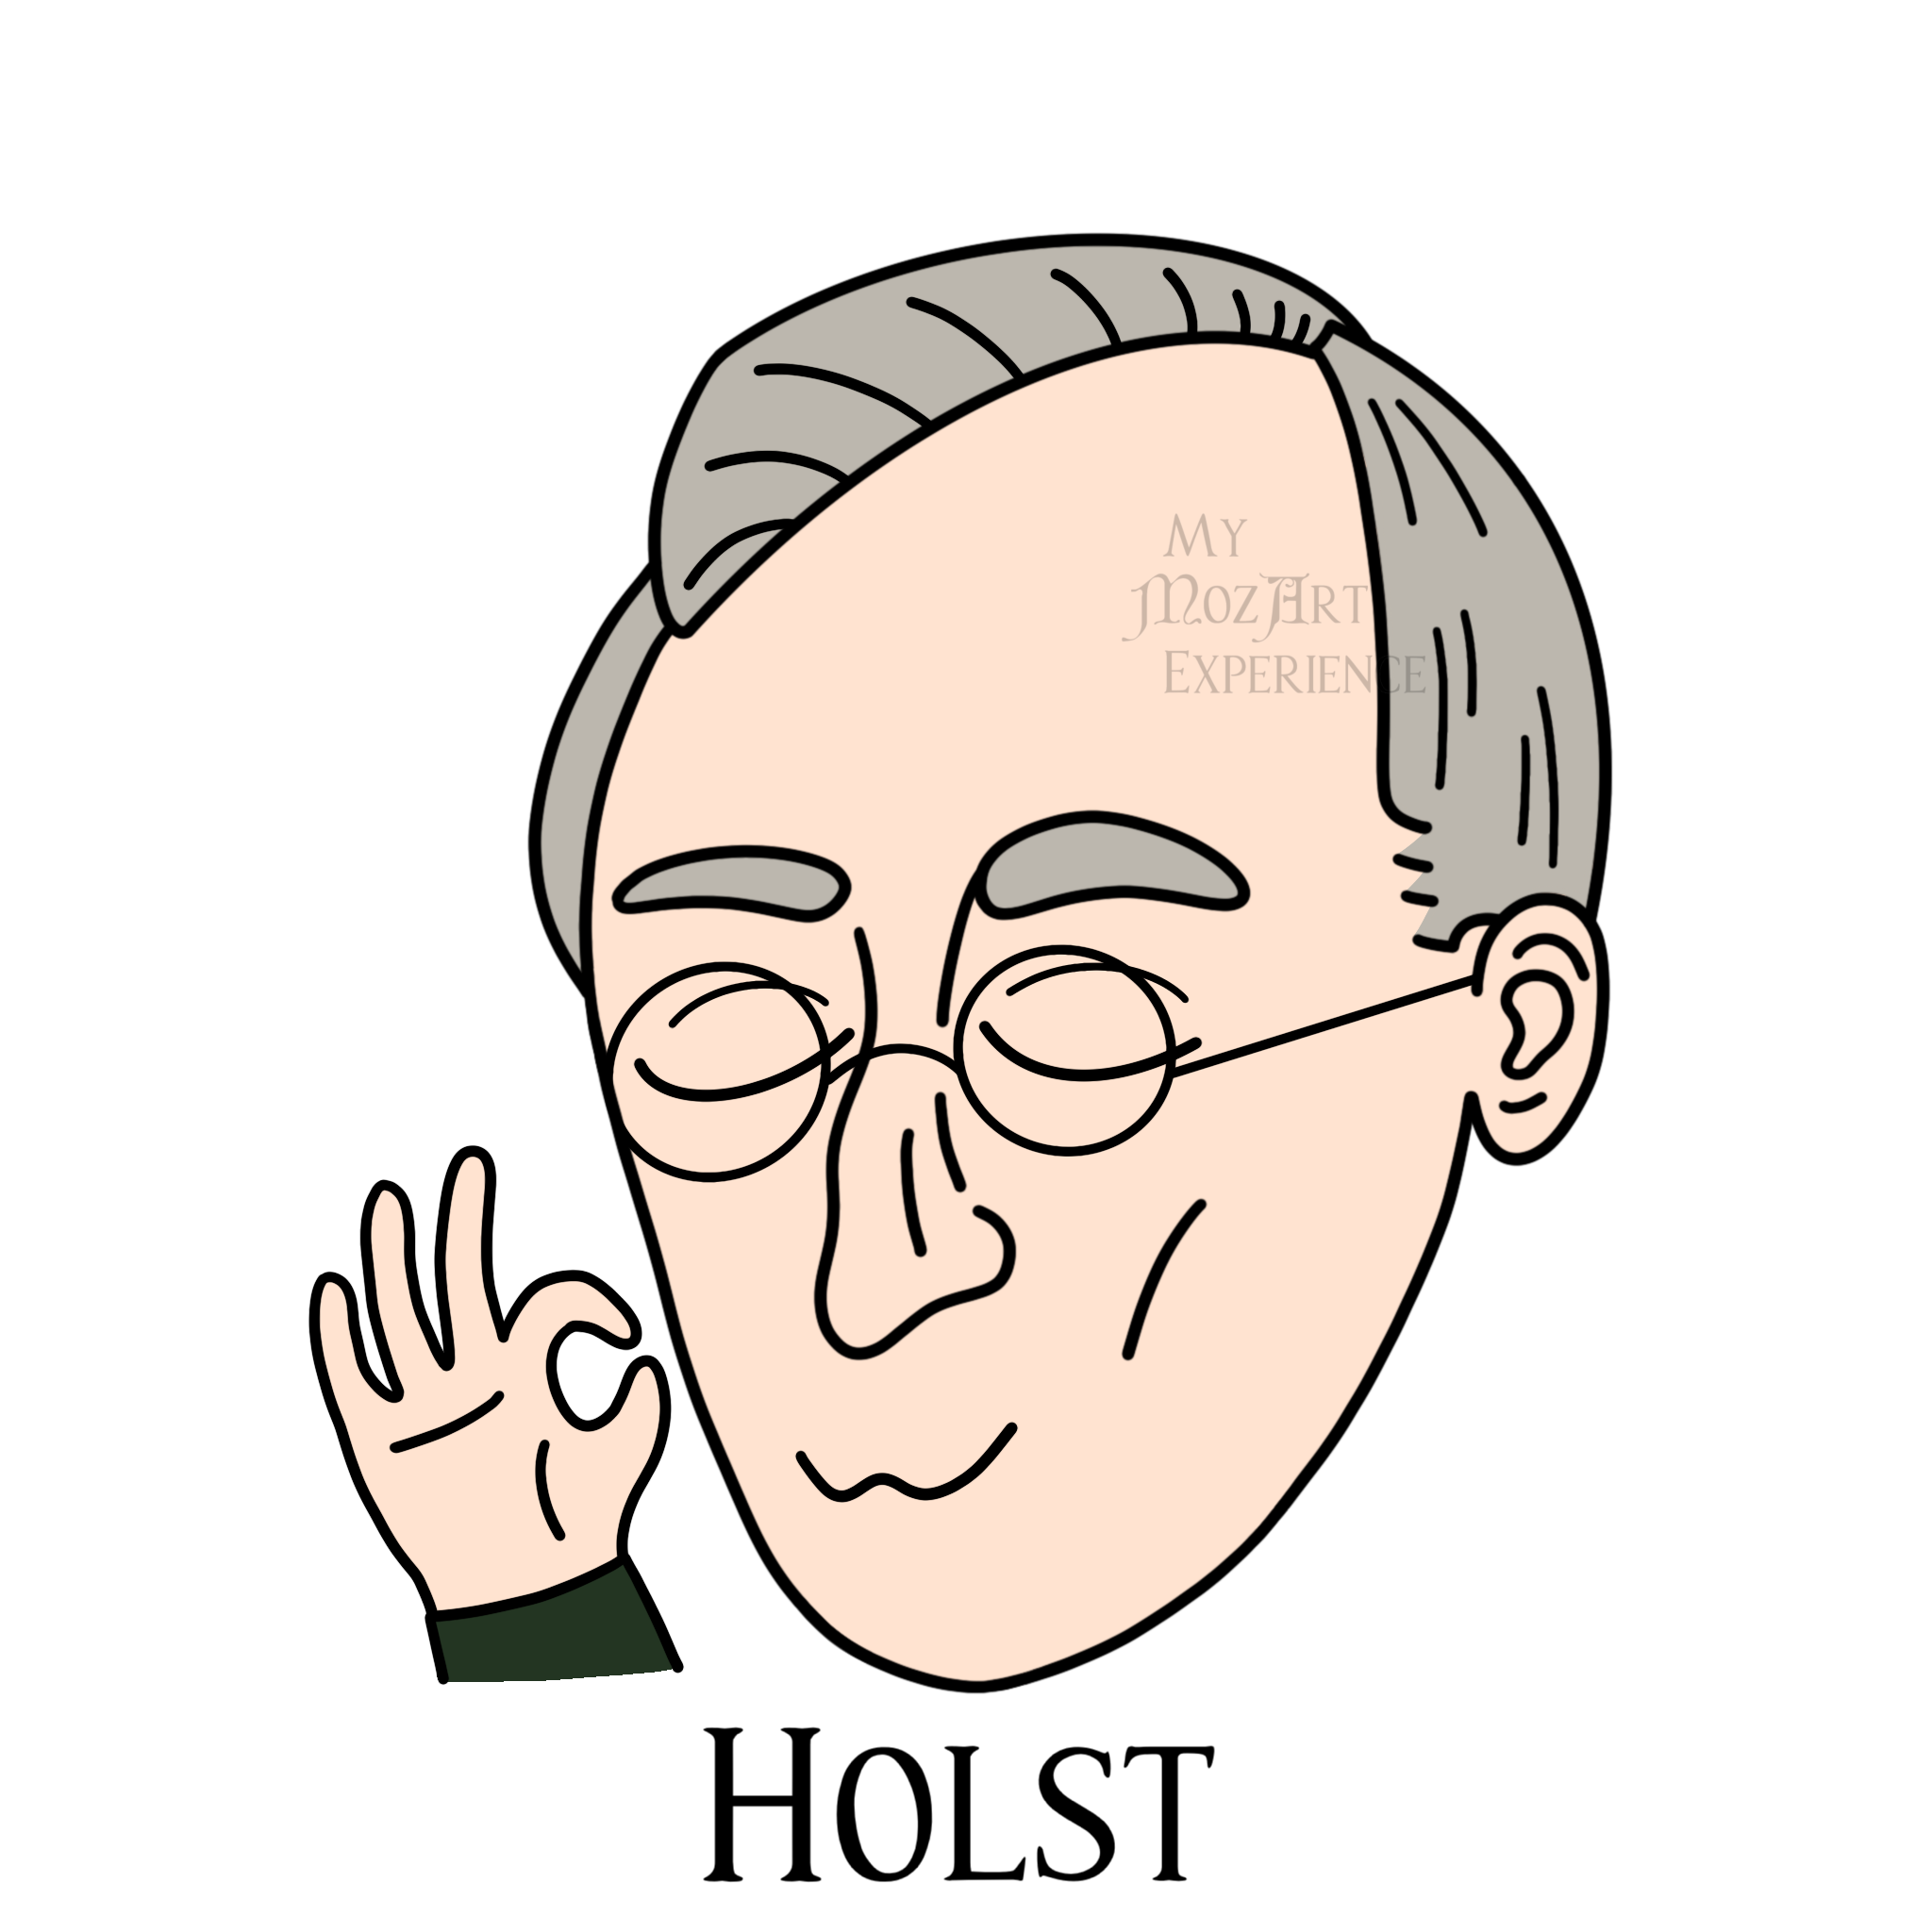 Composer Holst Cartoon Icon, making the OK finger sign